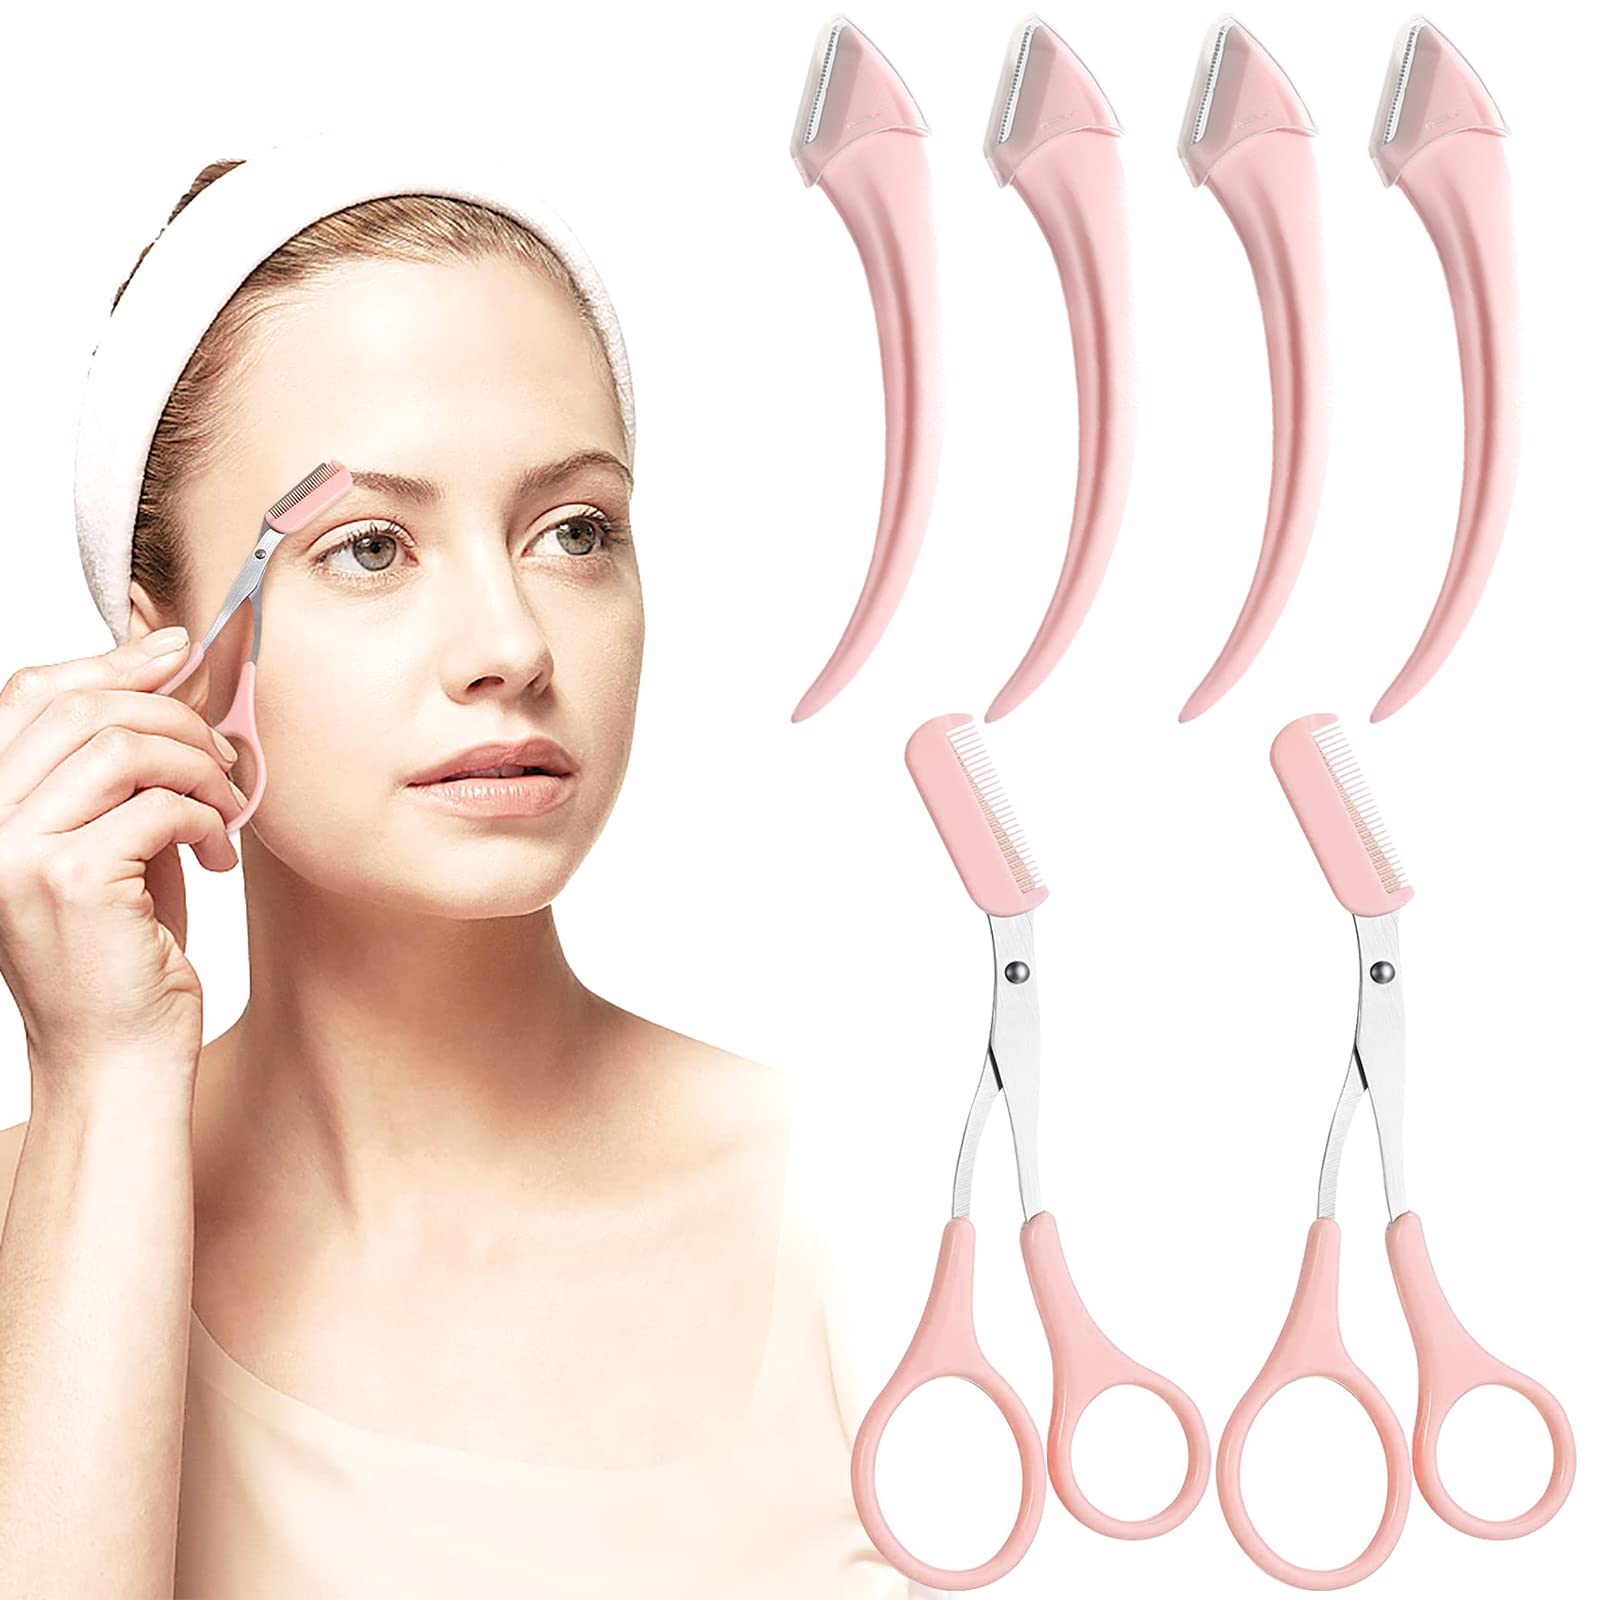 Stainless steel beauty embroidery scissors Brow scissors Pointed scissors  beauty tools eyebrow trimmer Makeup tools